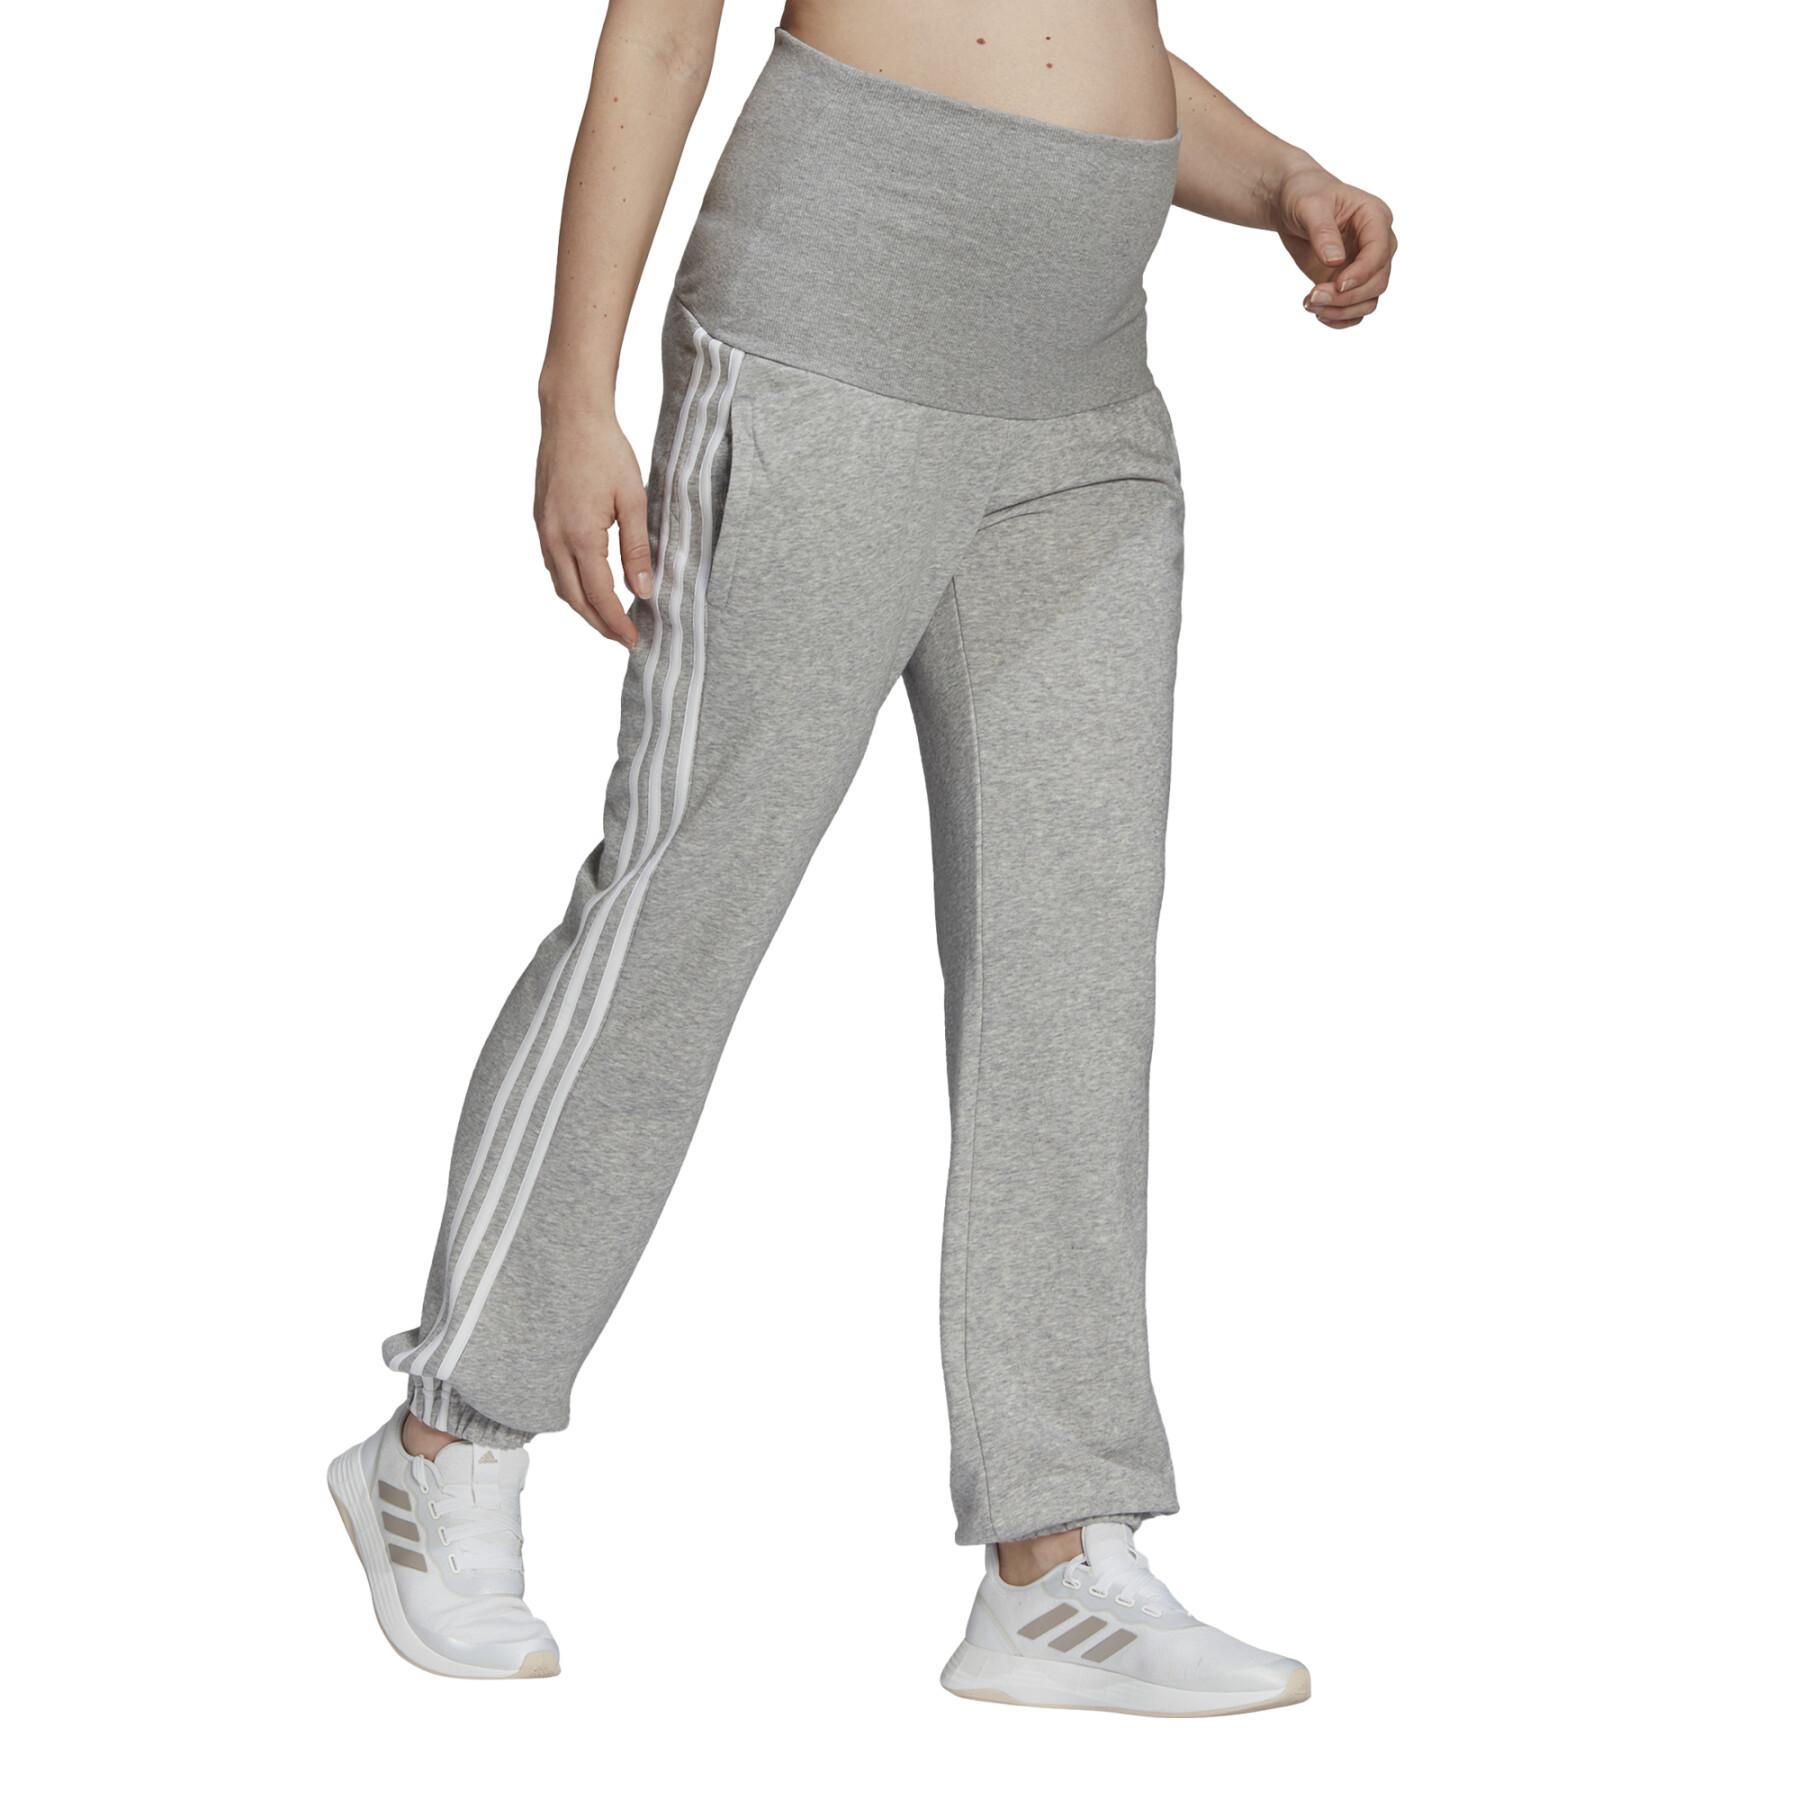 Women's trousers adidas Essentials Coton